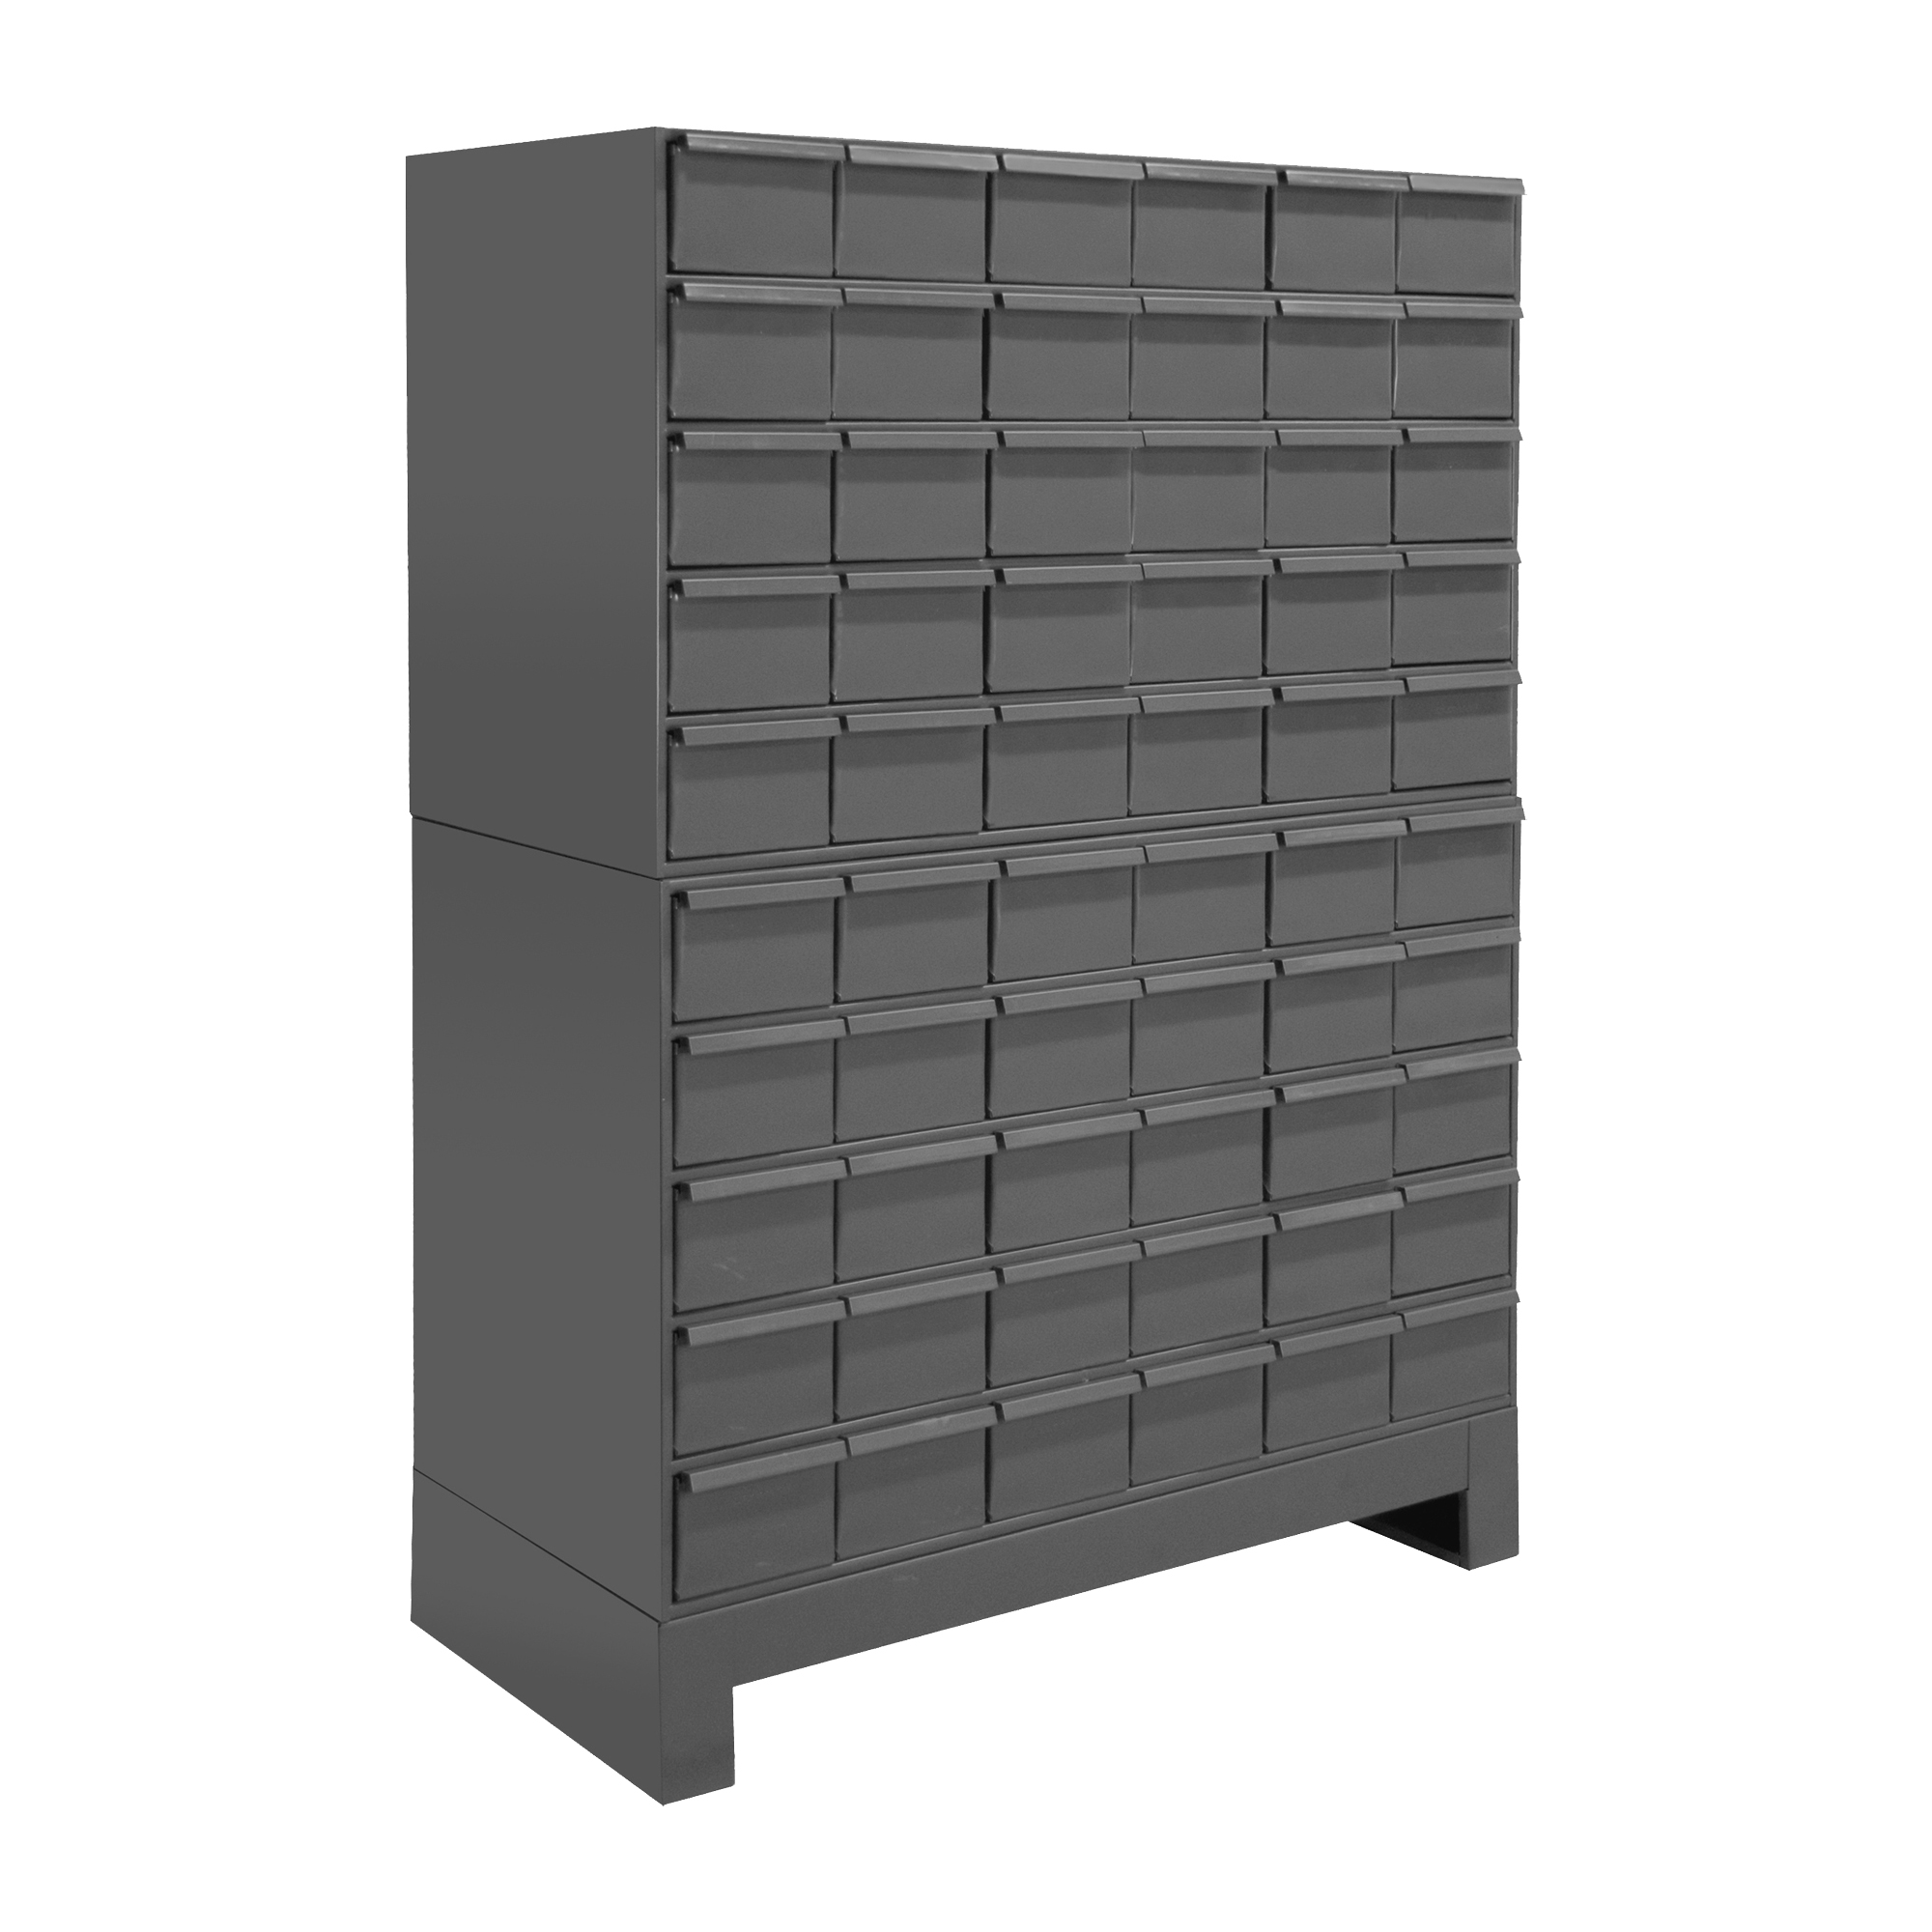 DURHAM MFG Drawer,12 Compartments,Gray 115-95-D568 Gray 